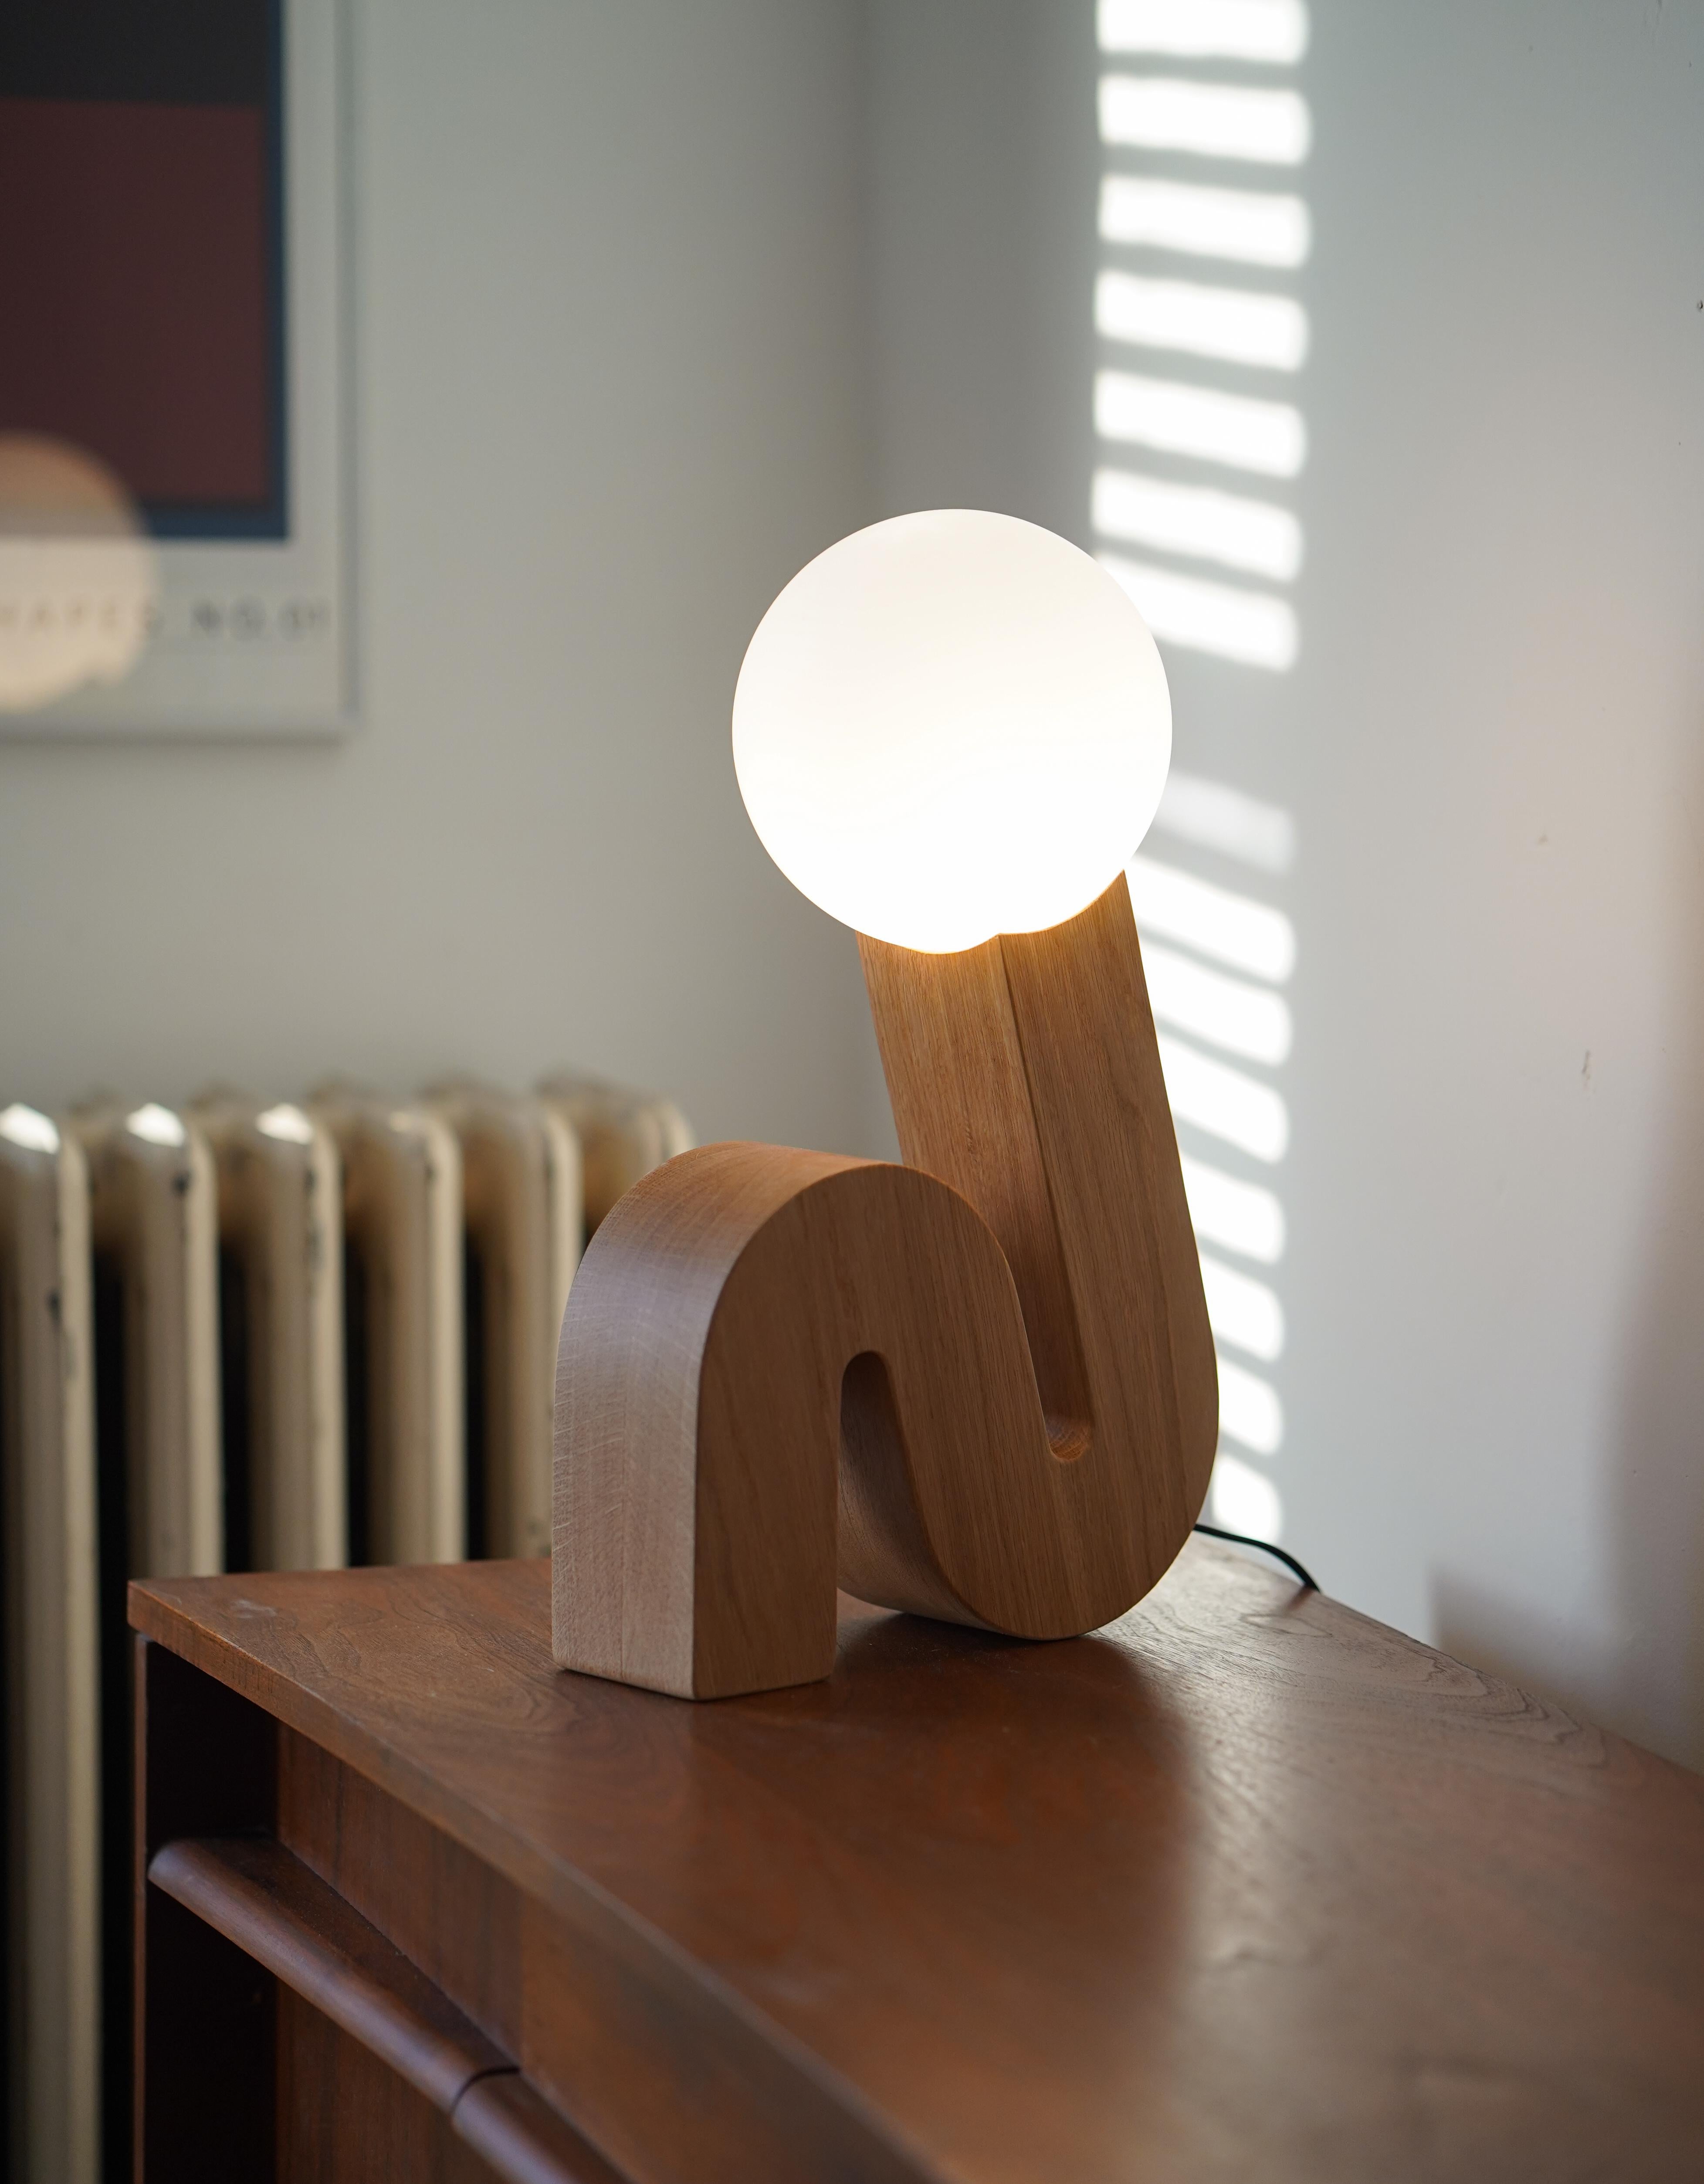 A lamp that is limber. 

Mimicking a sit-up position, the curl lamp uses a spherical glass shade nested into the top of a curved wooden base to resemble a head and body of a person mid-exercise.

The curl lamp is crafted and hand-finished from